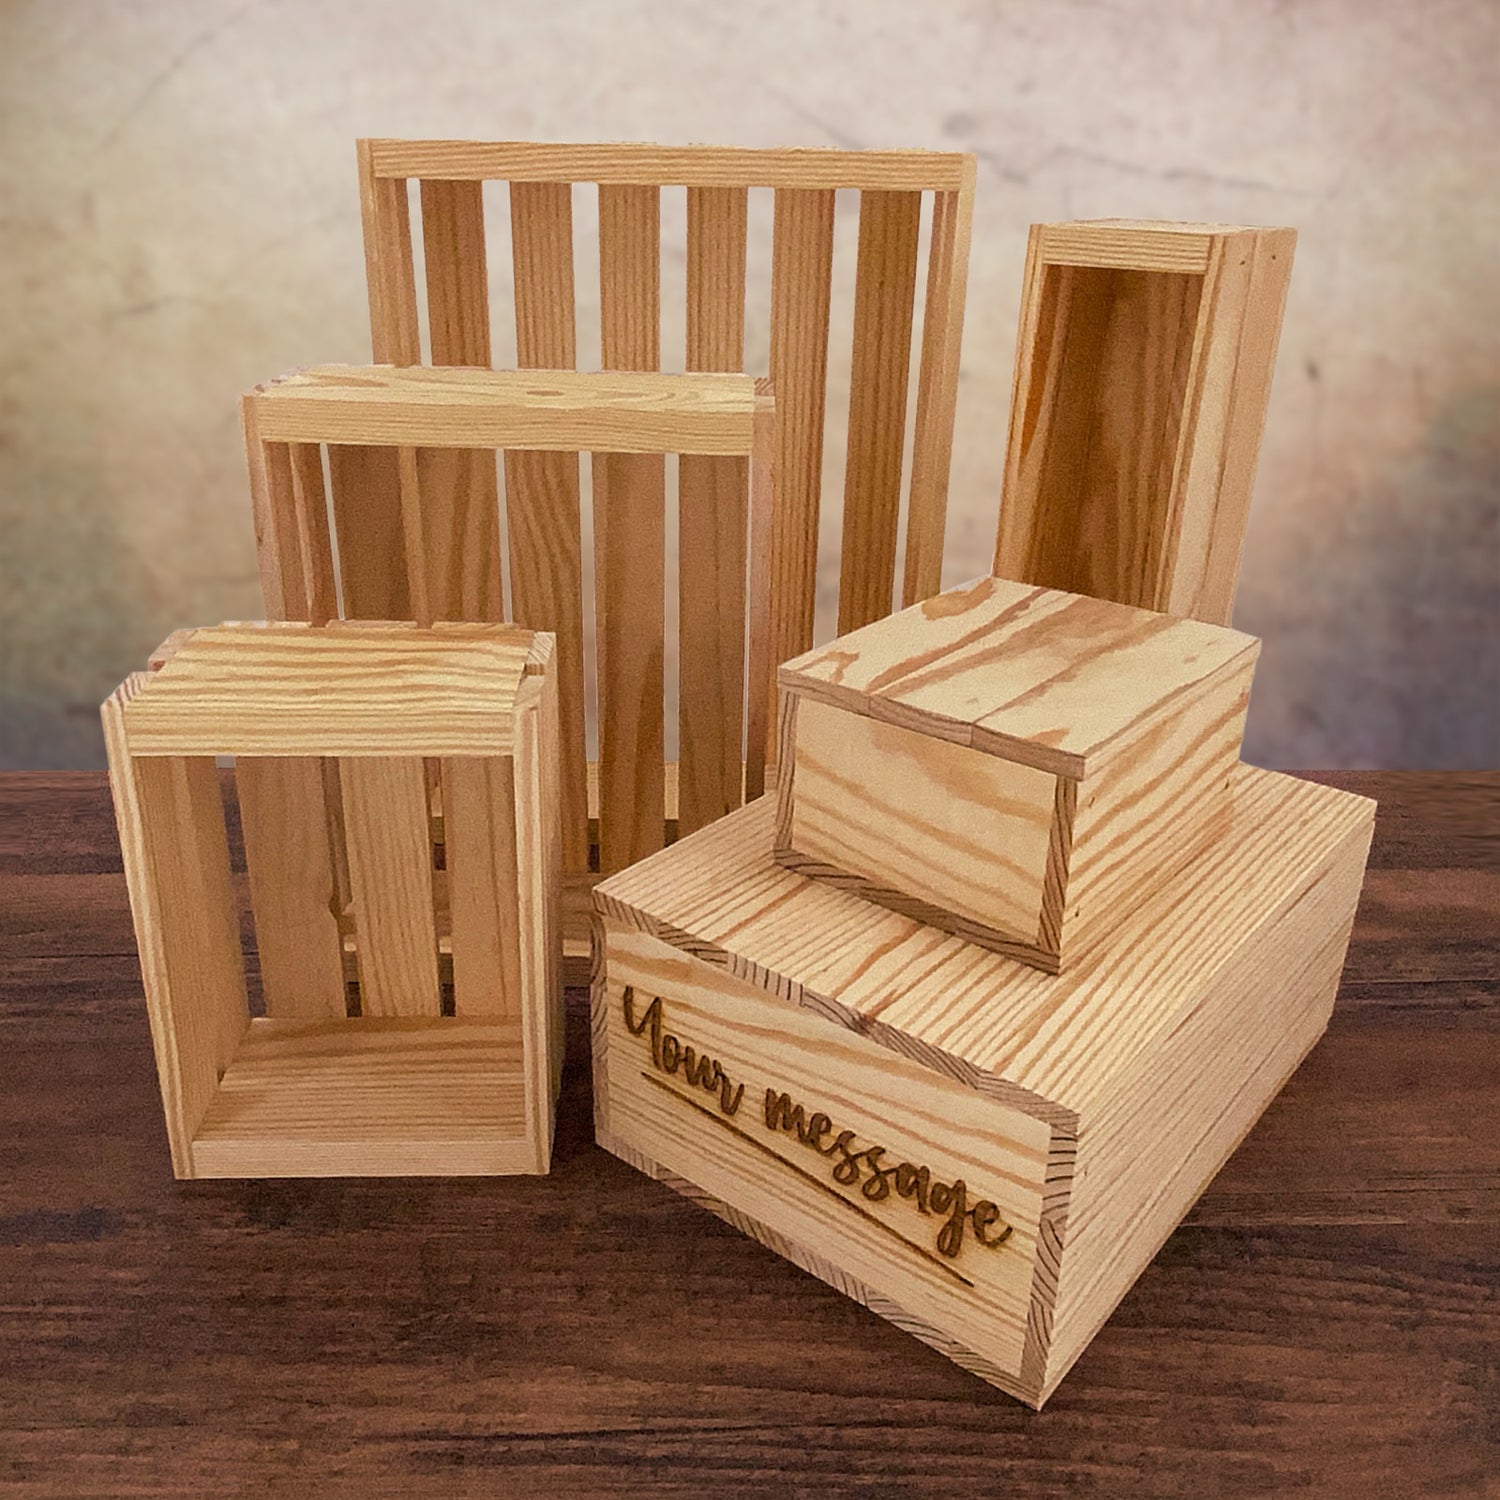 Collection of wooden slat and solid side crates by Carpenter Core